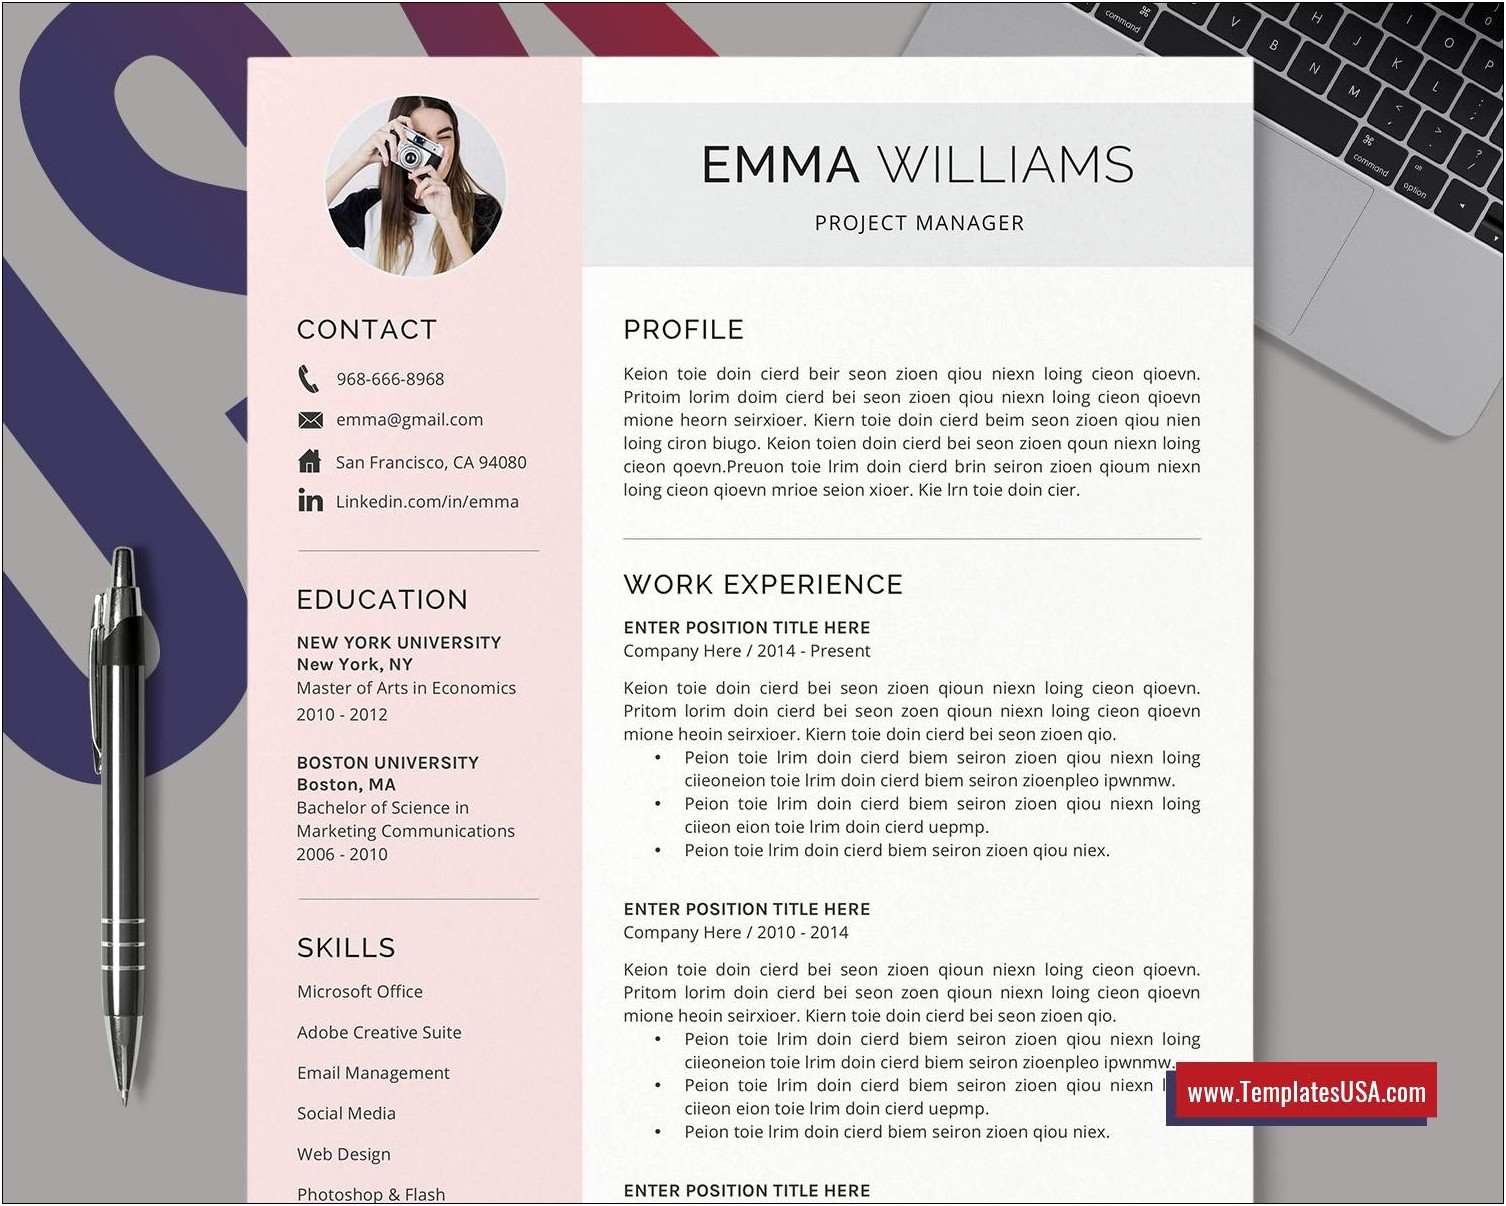 Resume Templates For Creative Jobs